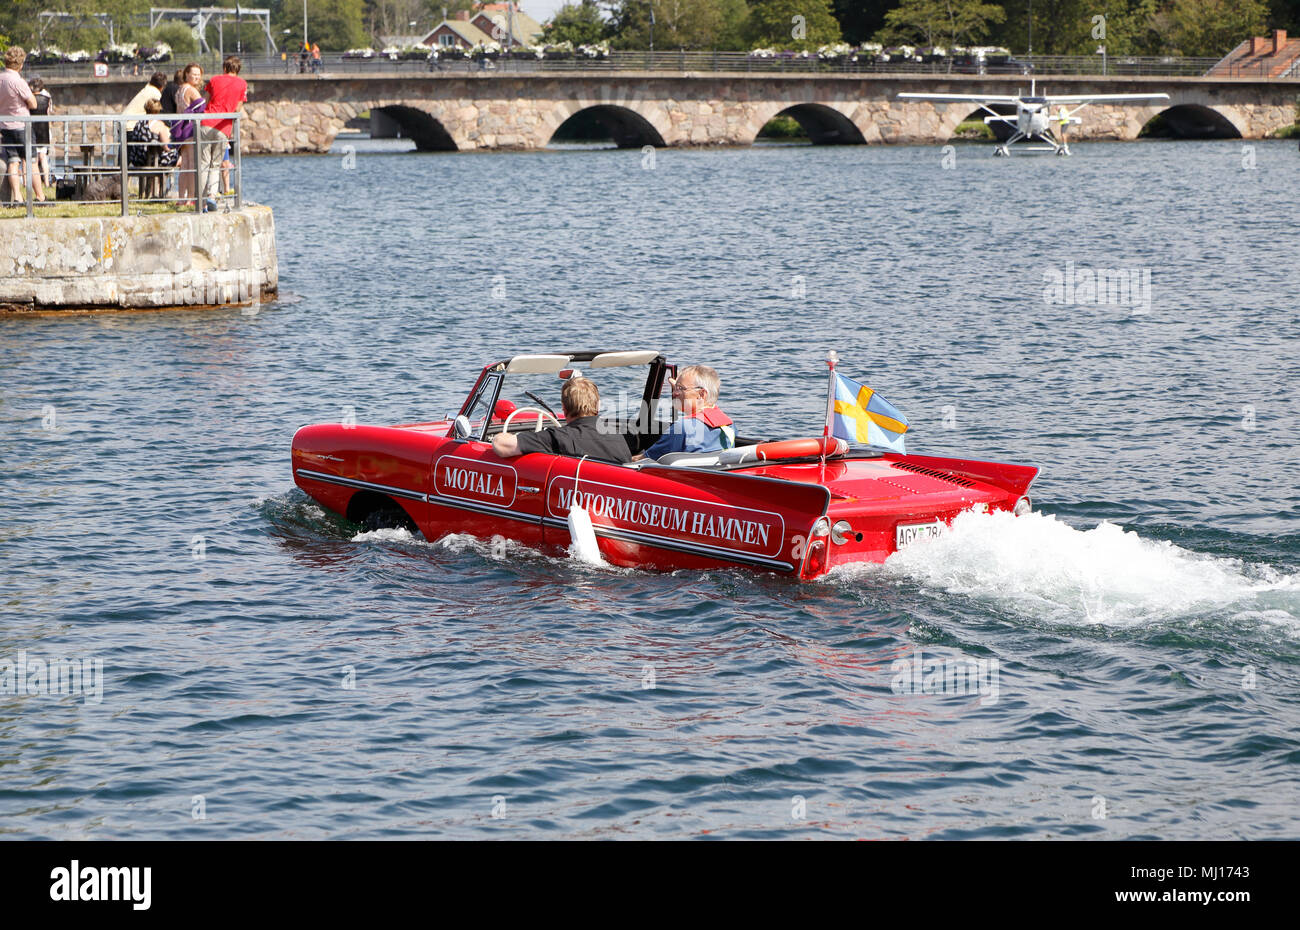 Motala, Sweden - August 8, 2015: Red amphibious Amphicar associated with the Motala Motor Museum running in the water with two people on board. Stock Photo